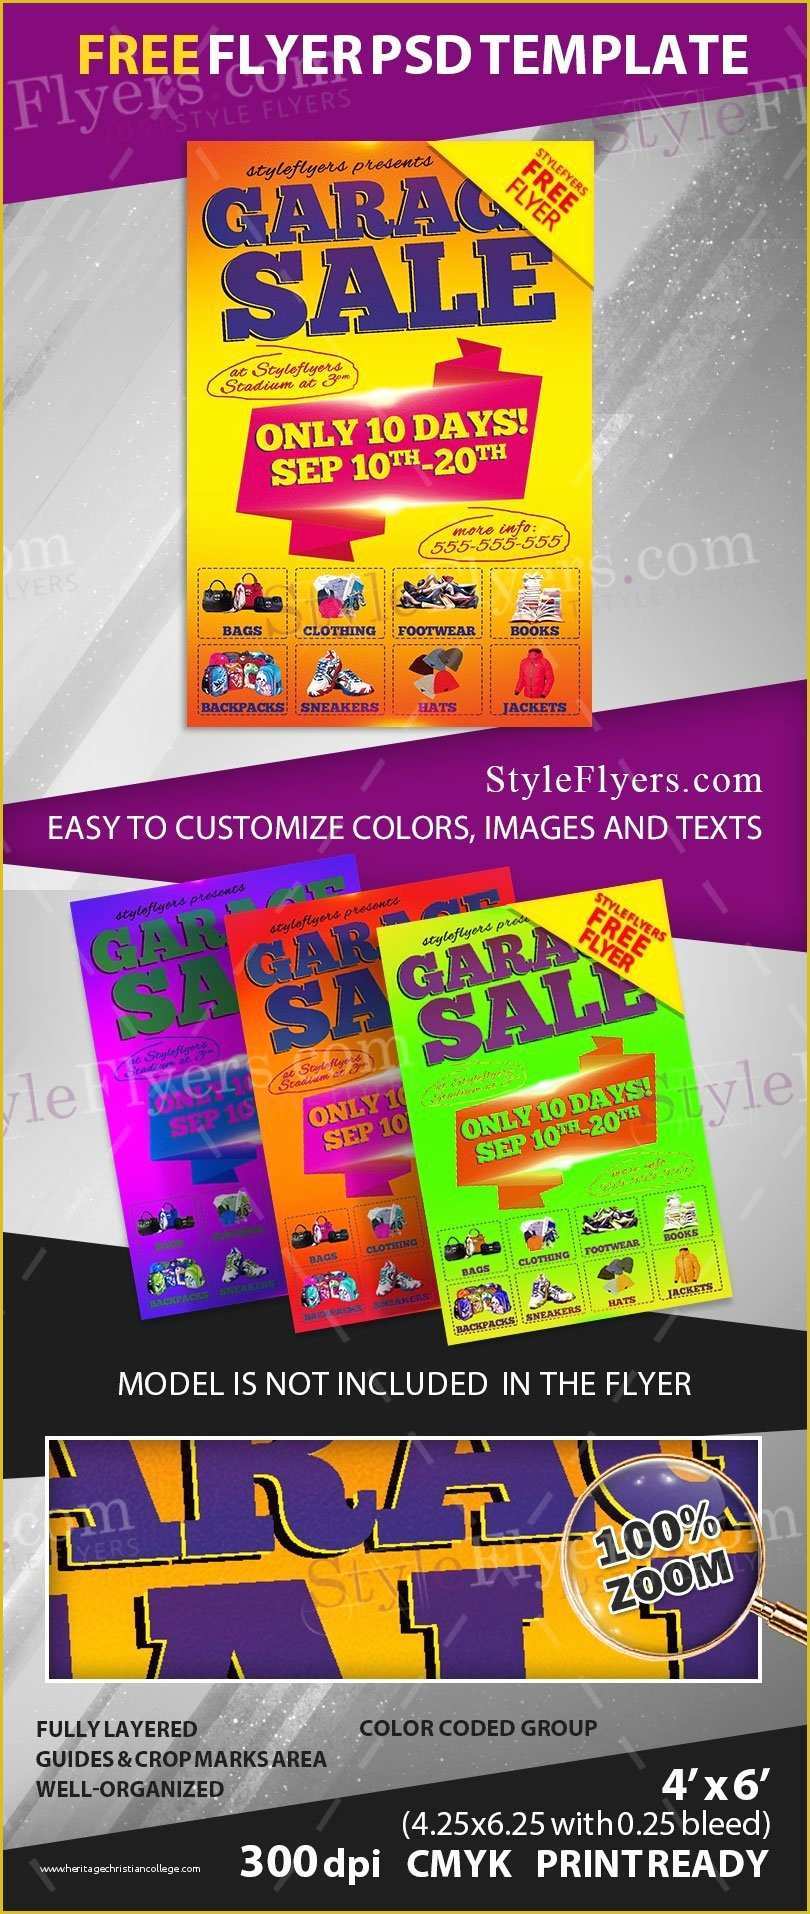 Psd Flyer Templates Free Download Of Garage Sale Free Psd Flyer Template Free Download